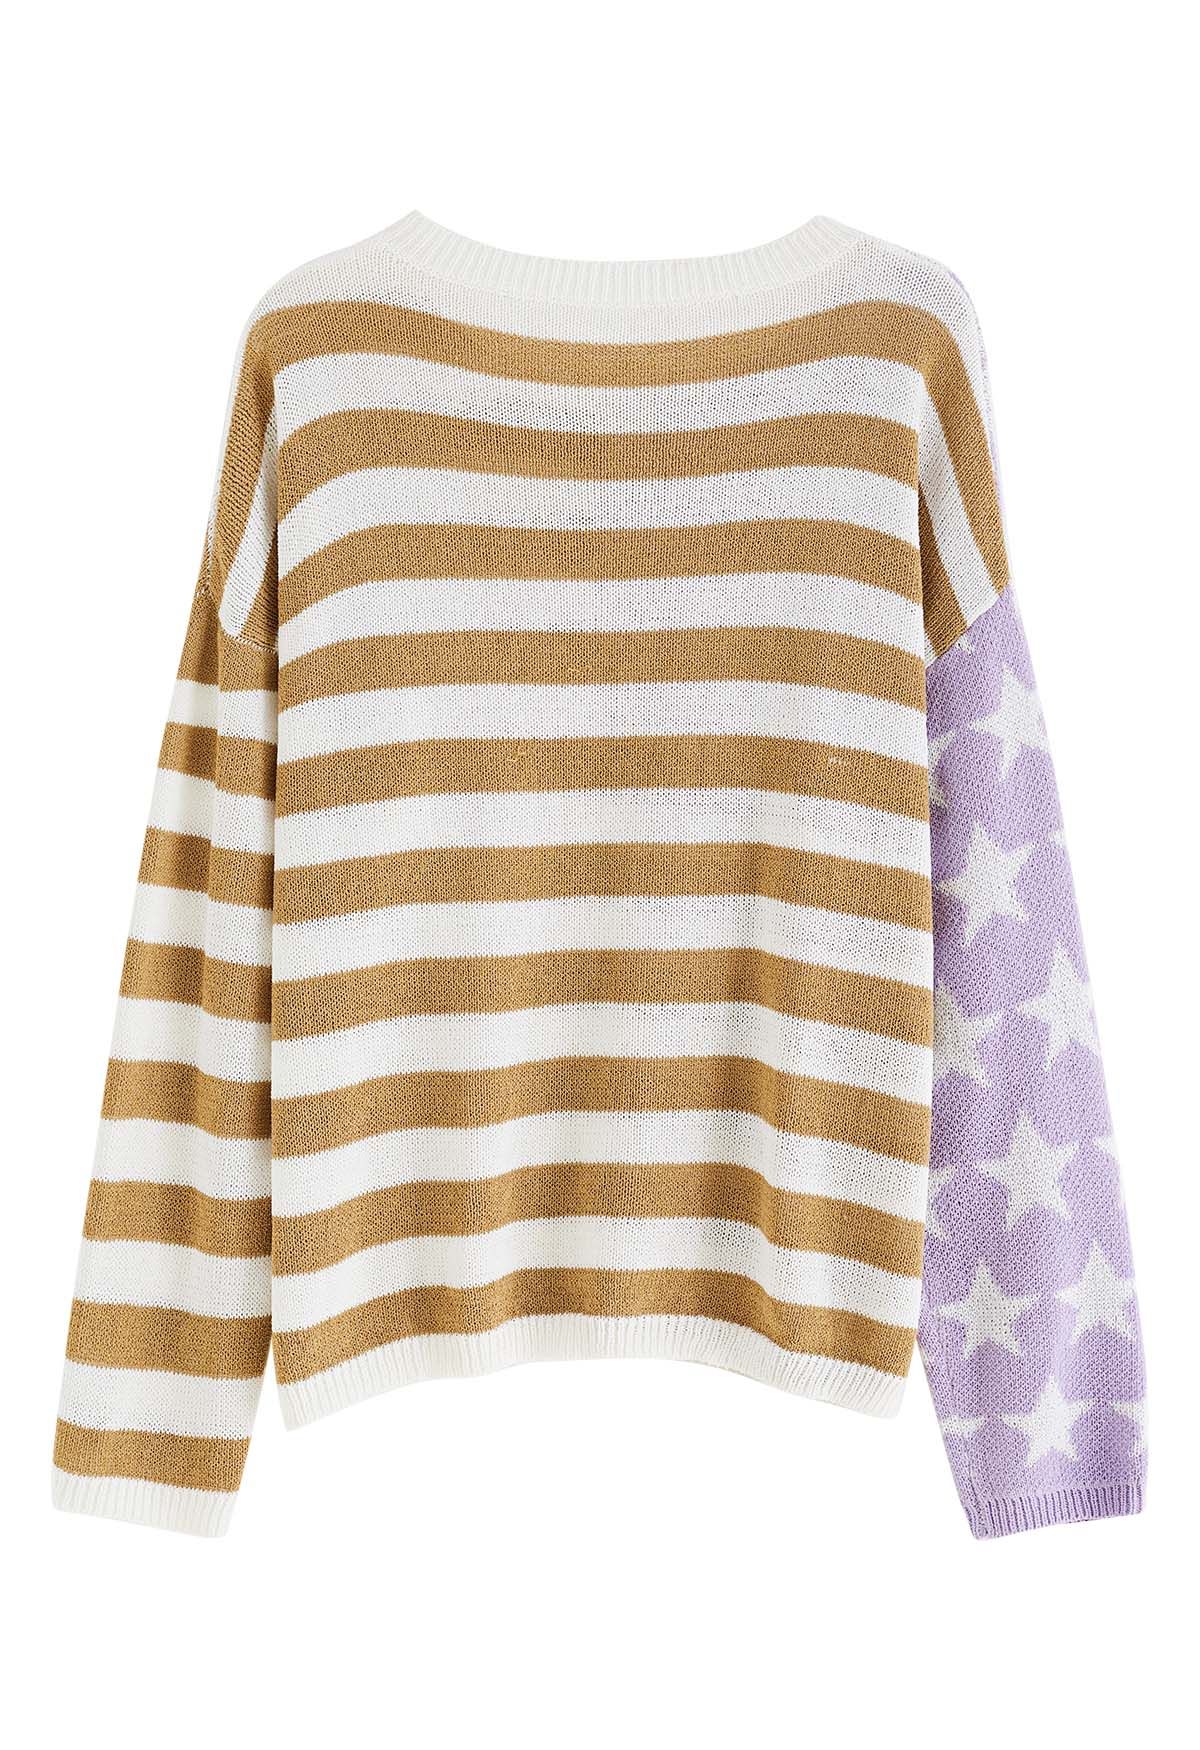 Bedruckter Strickpullover „The Stars and The Stripes“ in Hellbraun